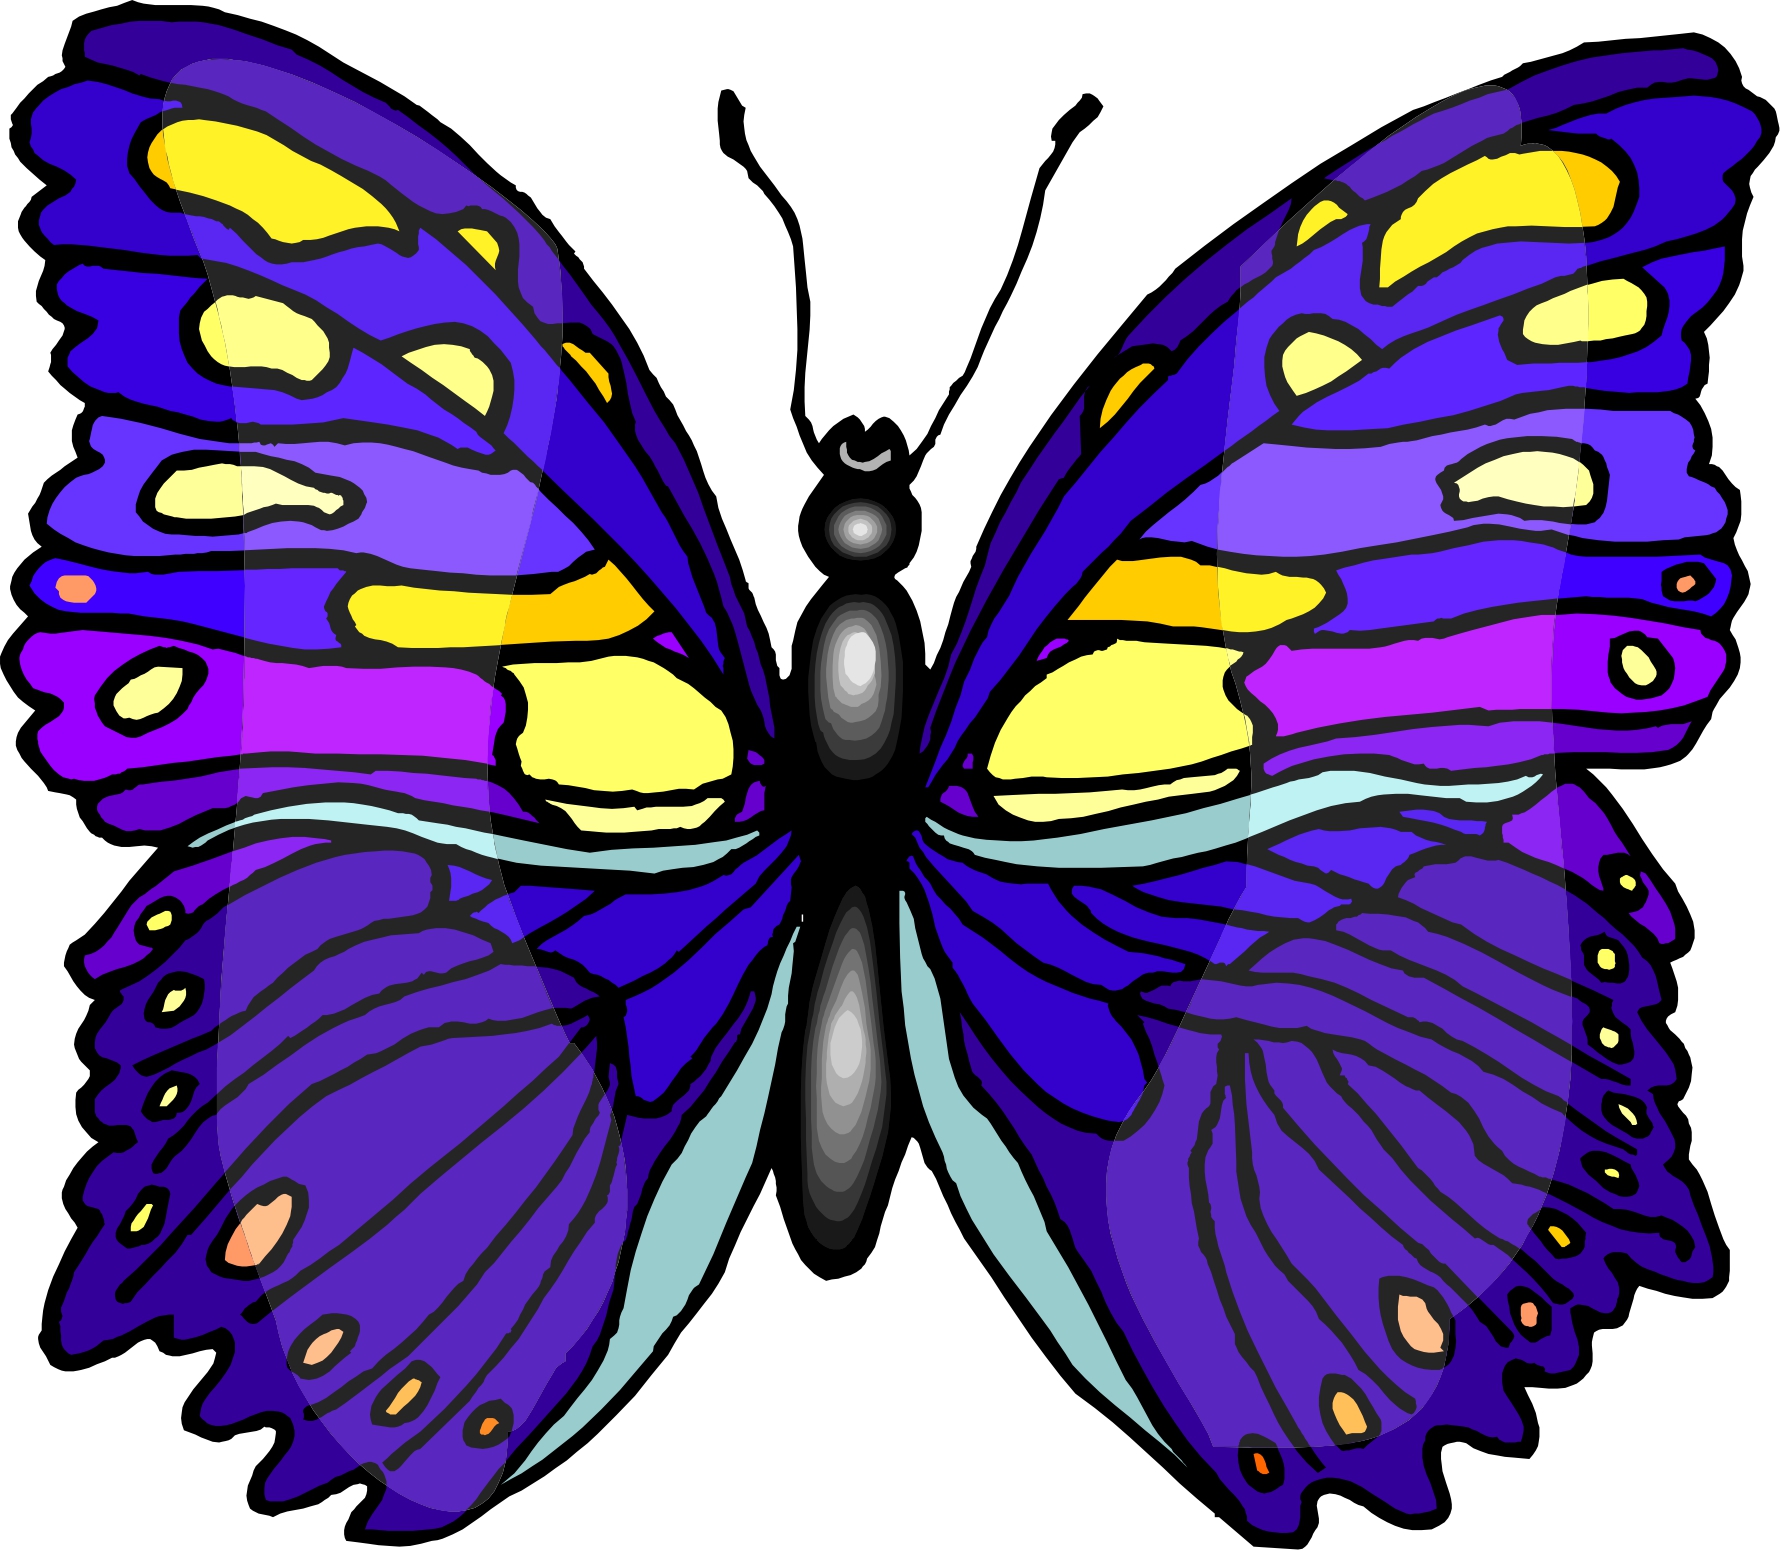 Free Cartoon Butterfly Images, Download Free Cartoon Butterfly Images png images, Free ClipArts